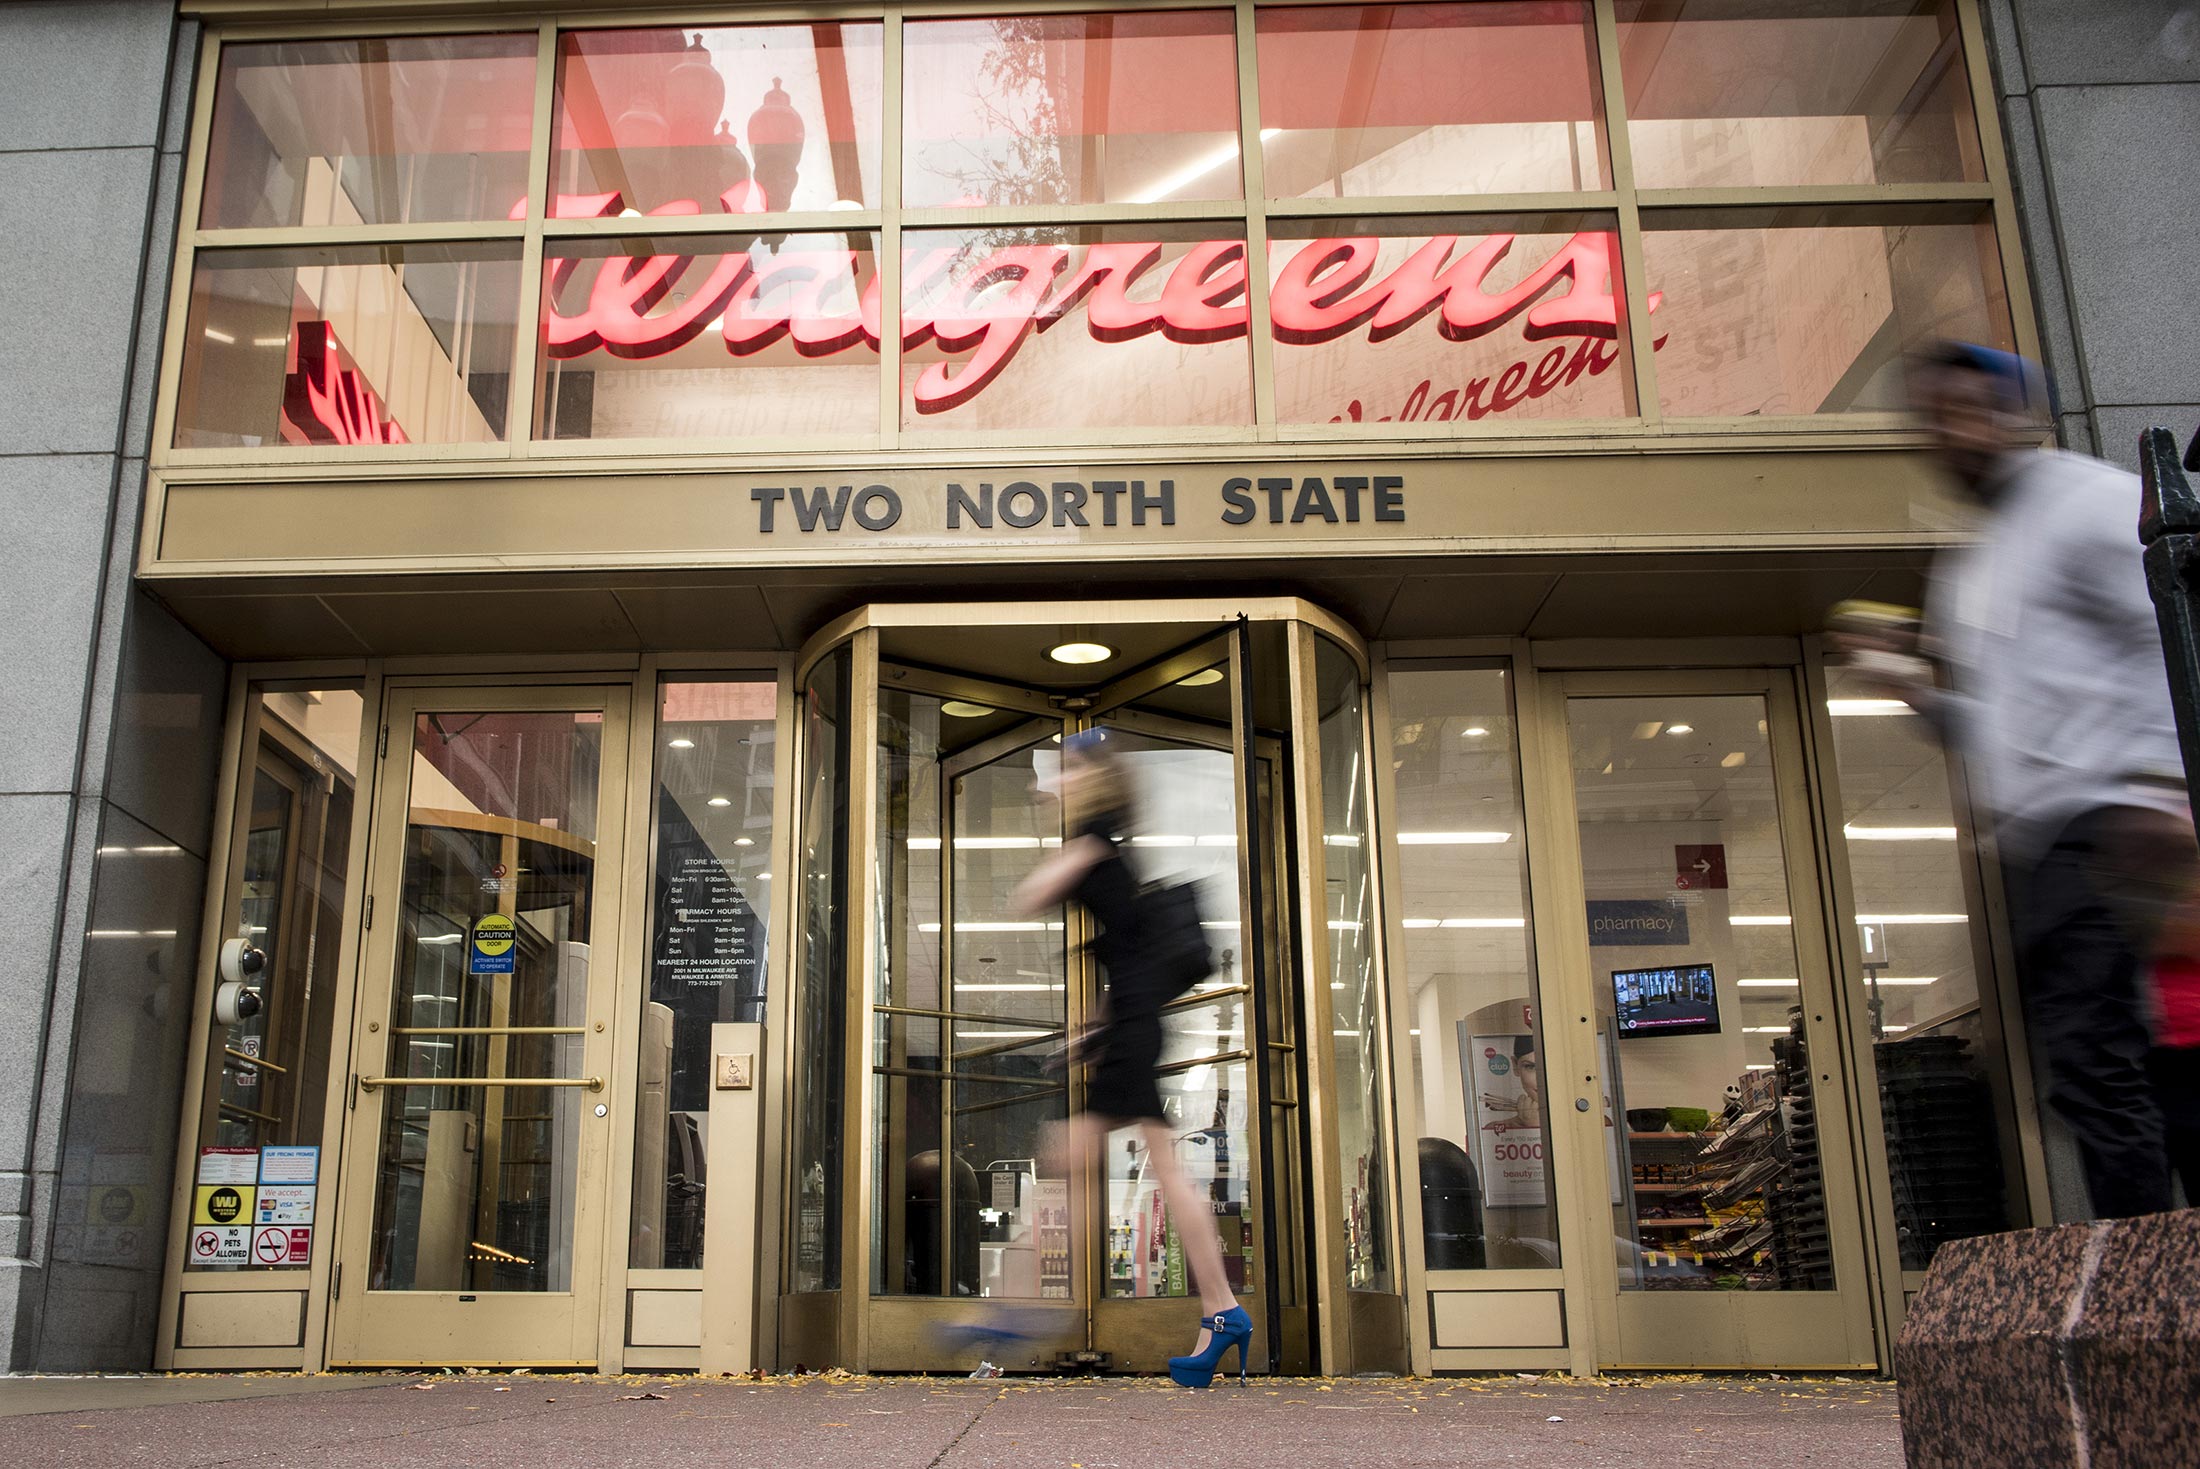 Pedestrians pass in front of a Walgreens Boots Alliance Inc. store in downtown Chicago, Illinois, U.S., on Tuesday, Oct. 18, 2016.
